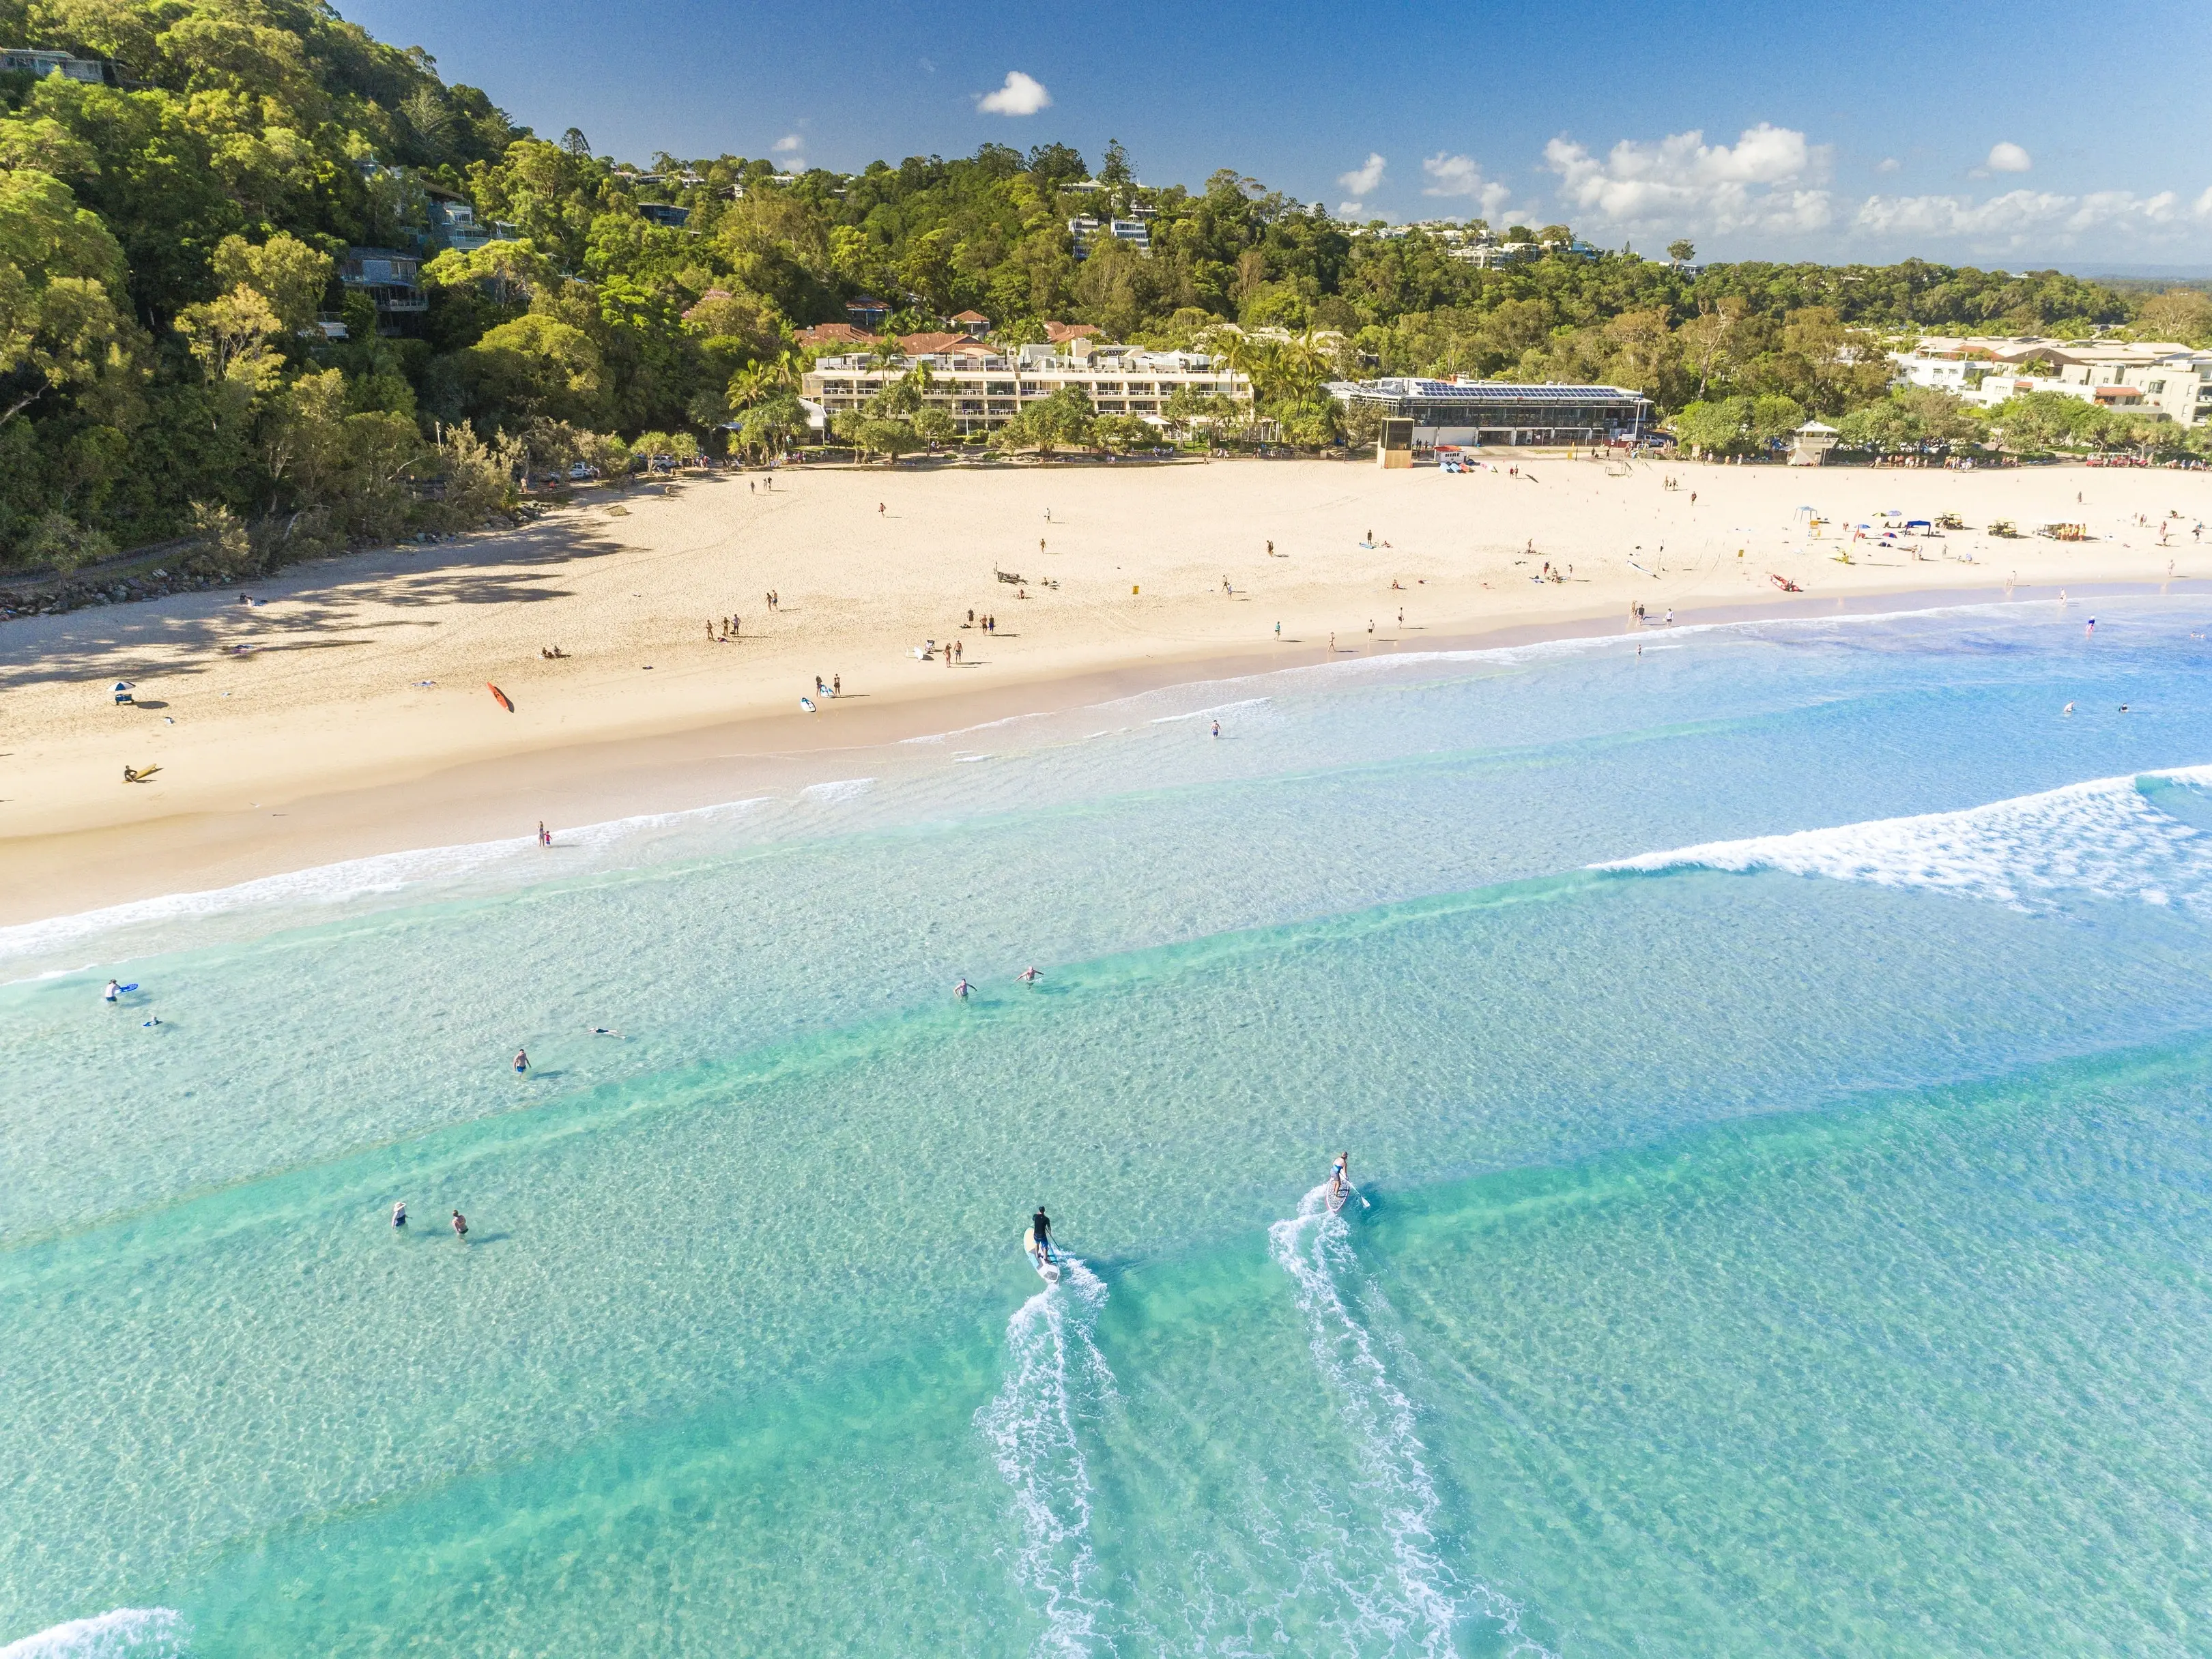 Aerial shot of wide beach with bright blue water, peach sand and fringed with trees and a beach resort building. Image credit: Tourism and Events Queensland